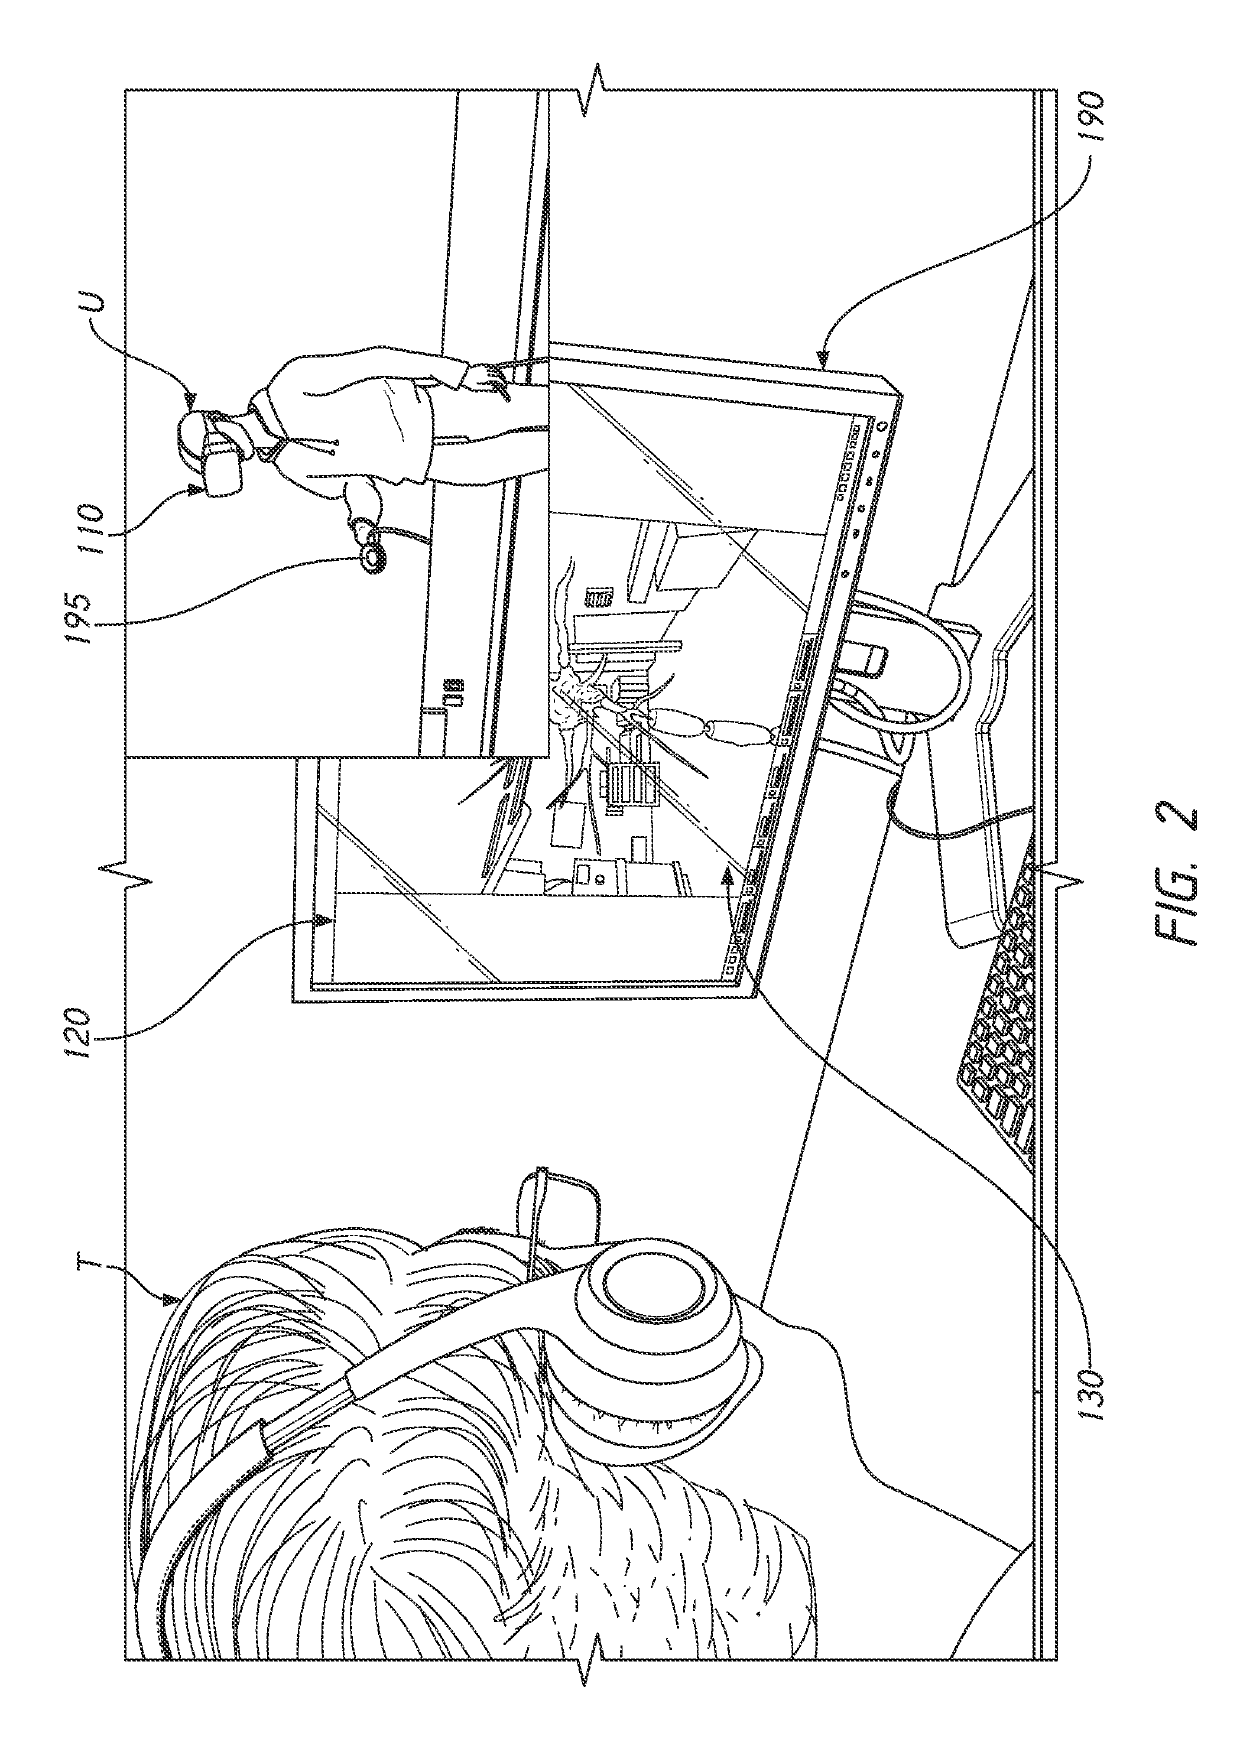 Systems and methods for multi-user virtual reality remote training